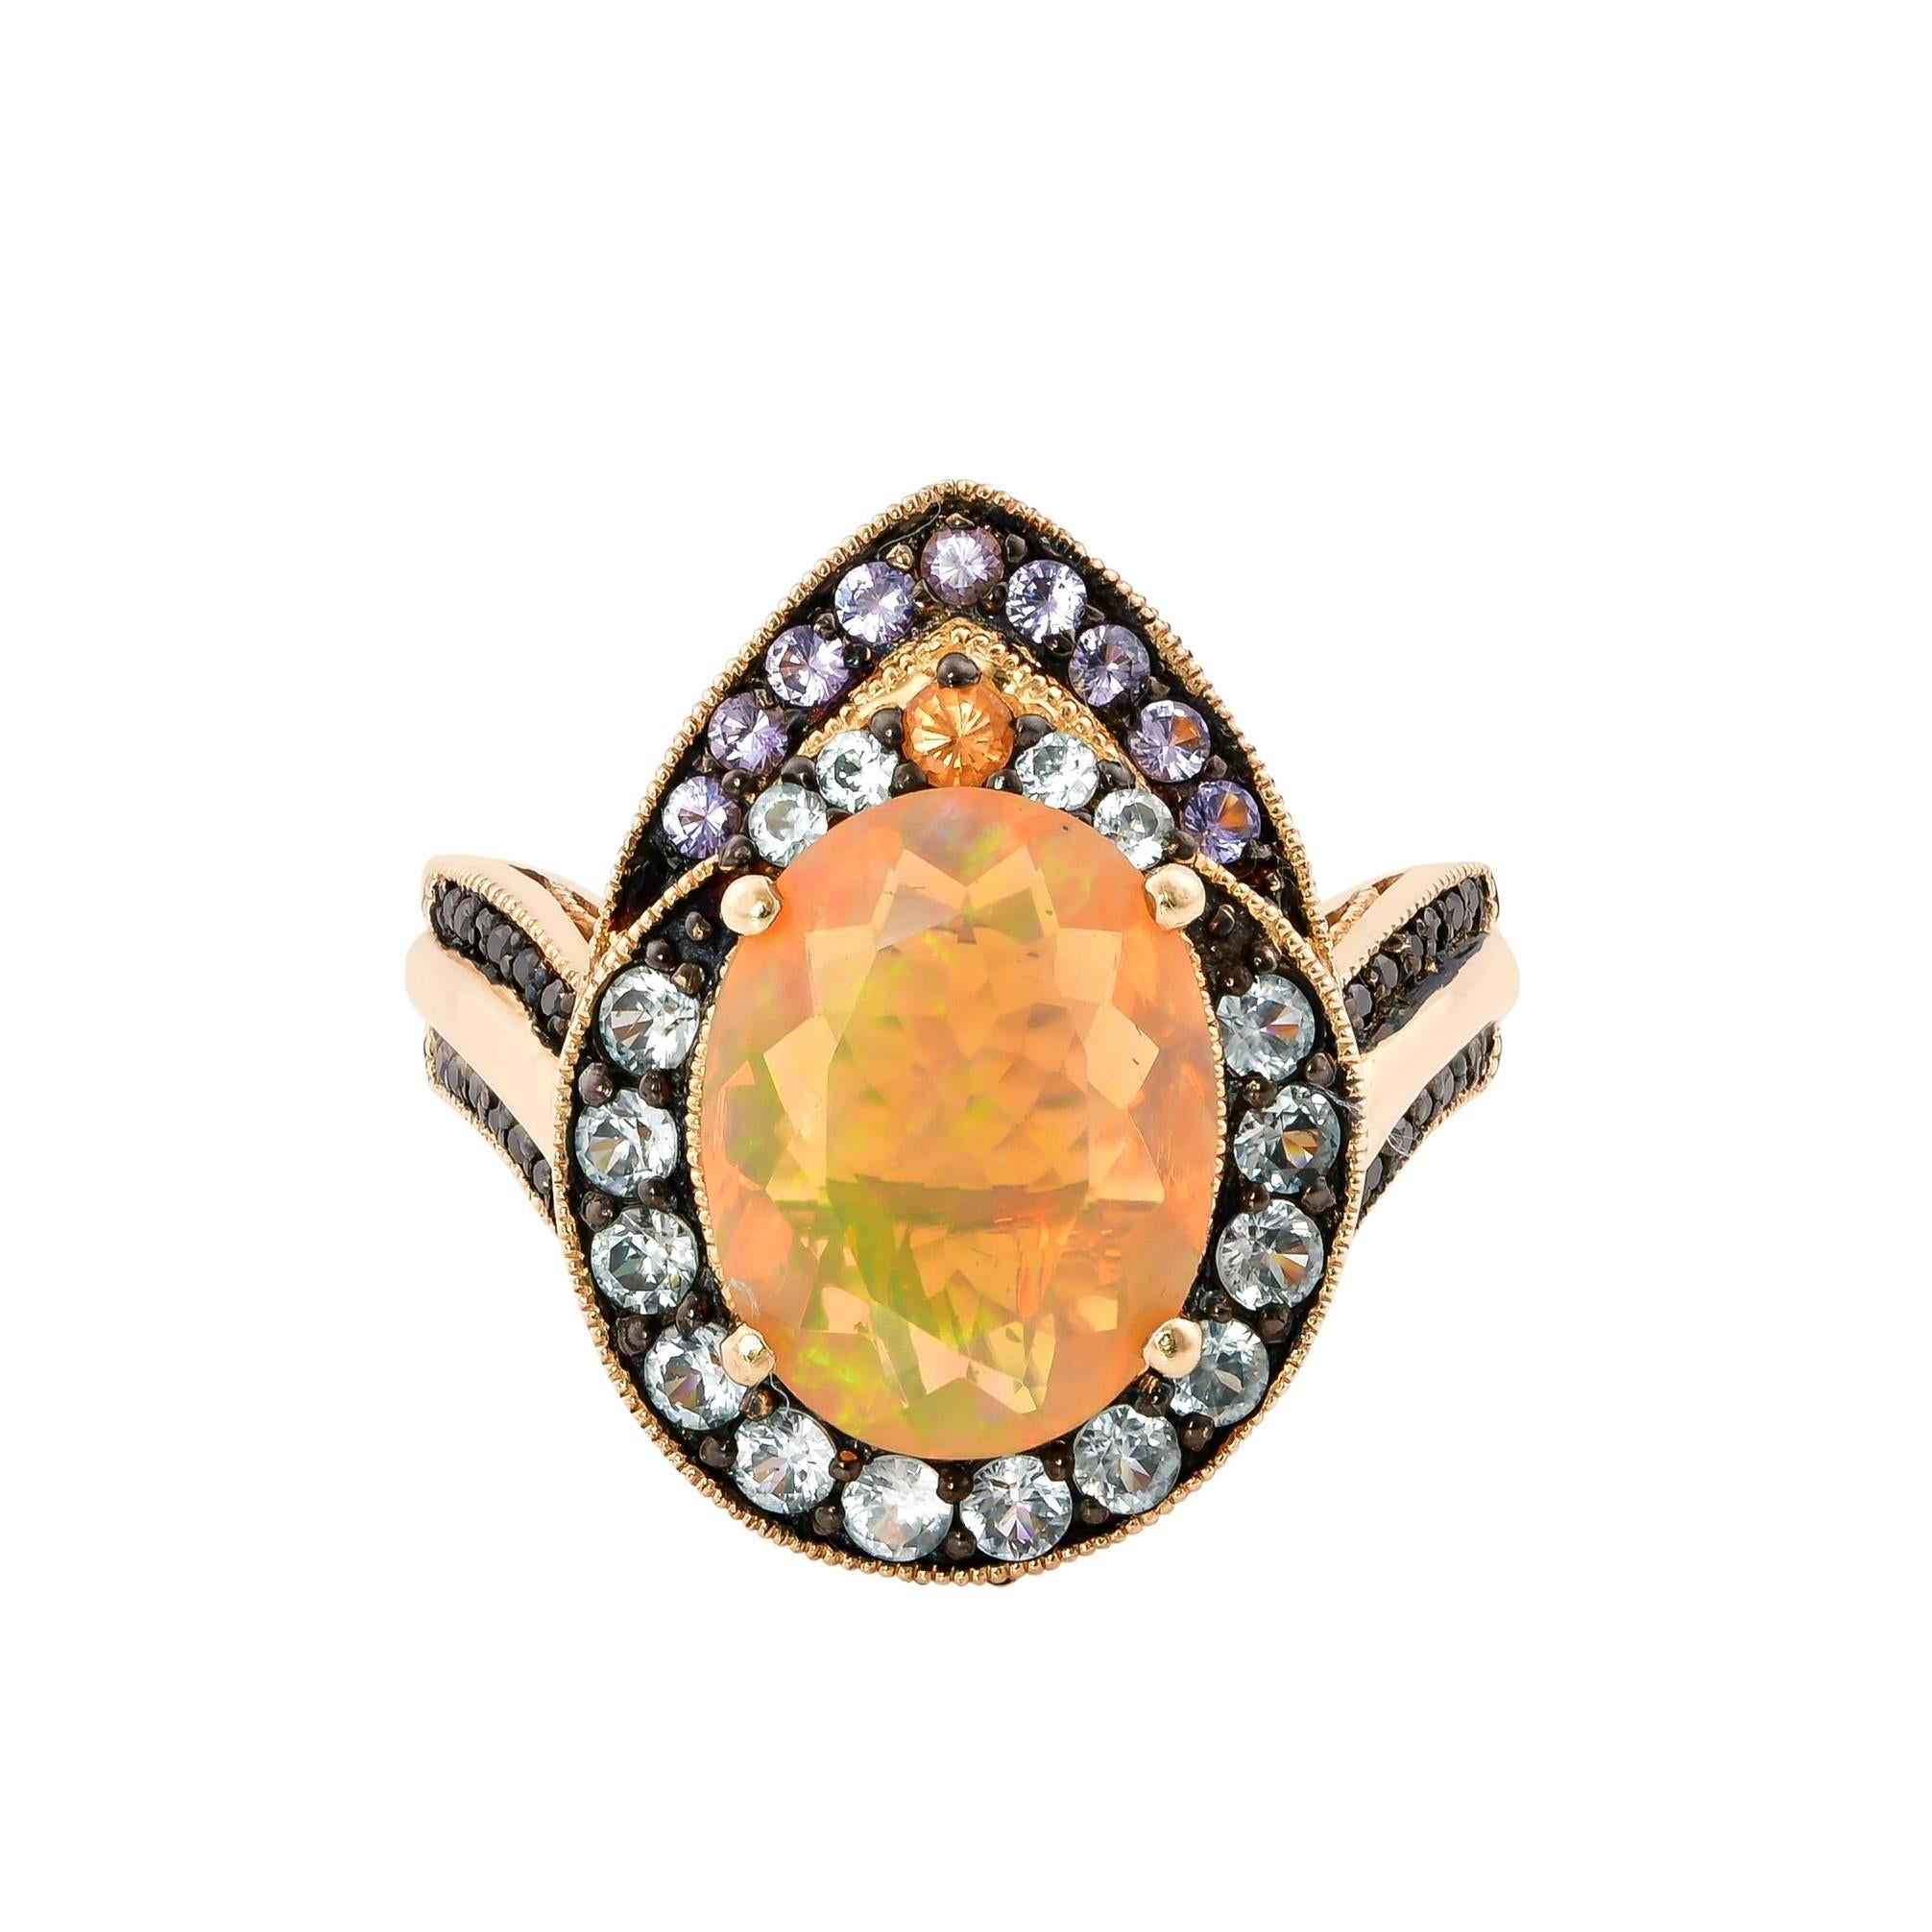 Oval Cut 1.8 Carat Ethiopian Opal Ring in 14 Karat Yellow Gold with Diamonds For Sale